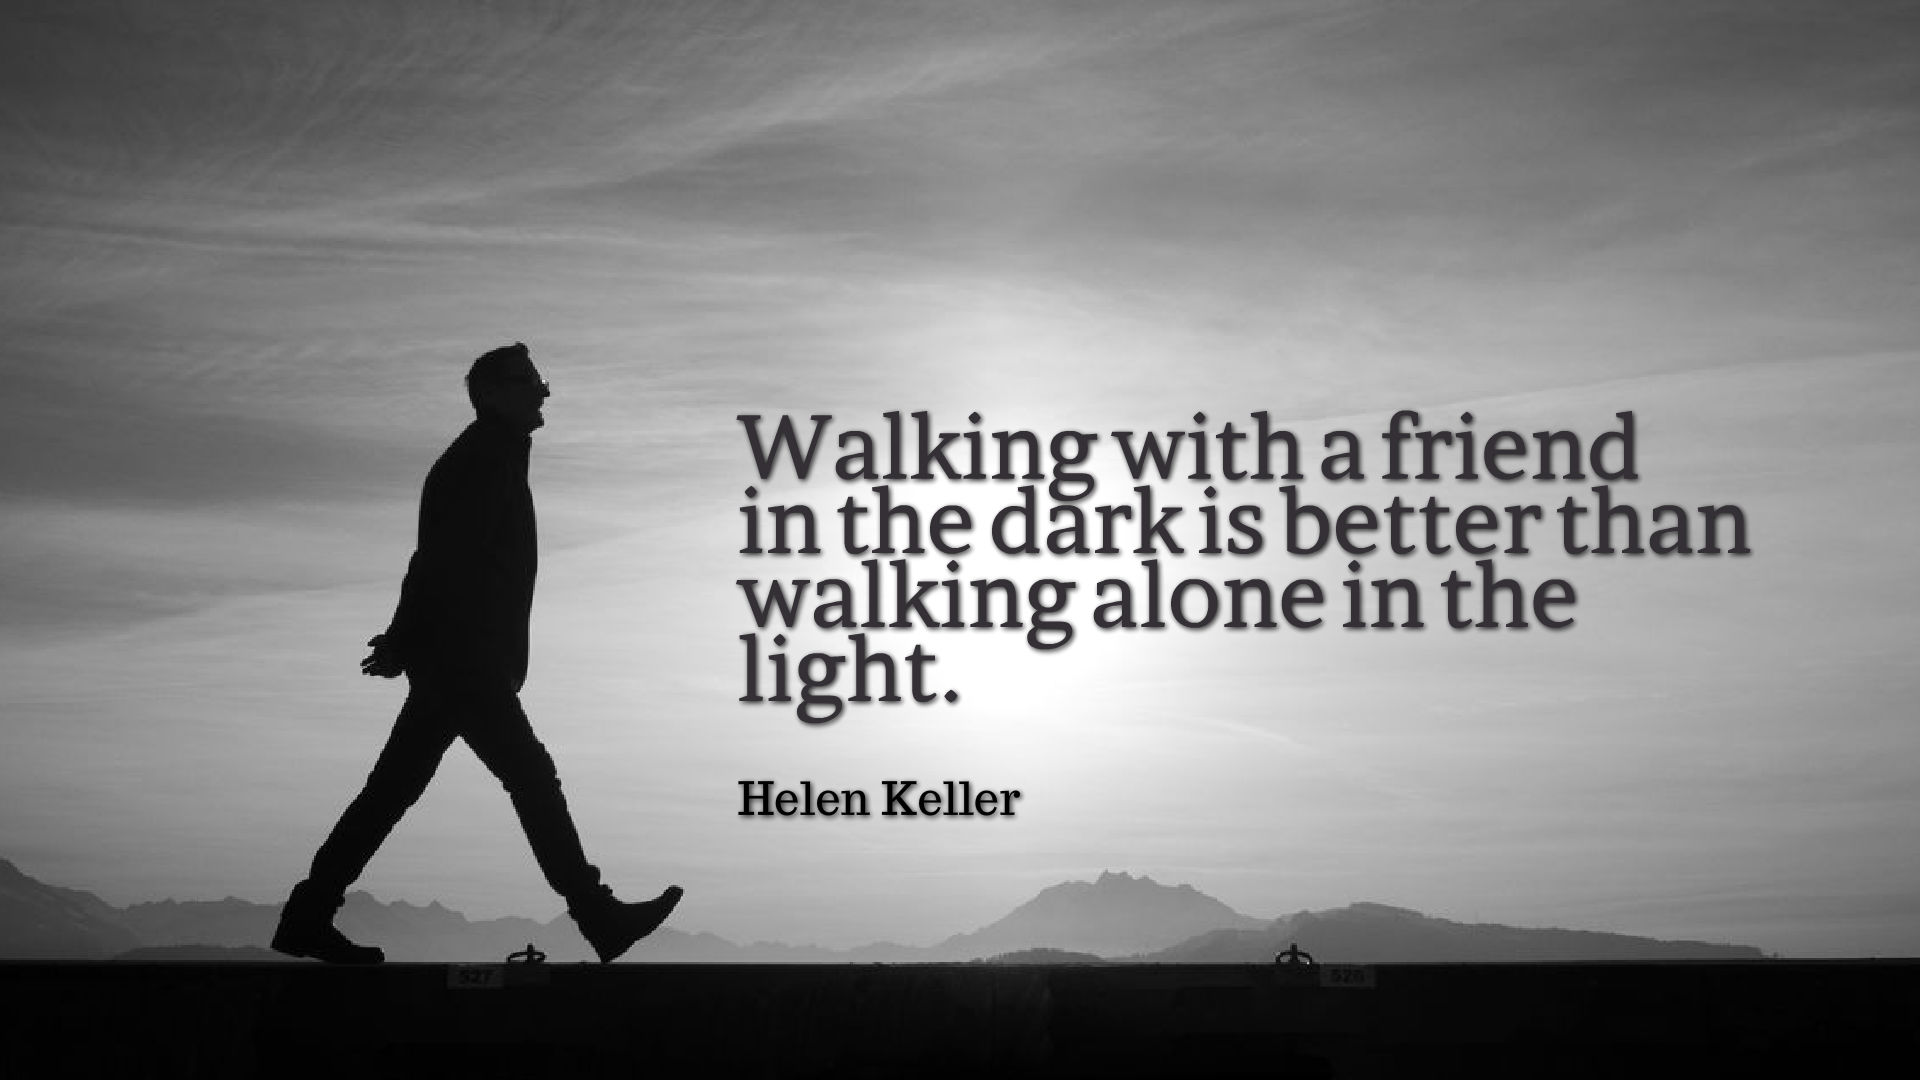 Alone Quotes Hd Wallpapers - Alone Wallpaper With Quotes - HD Wallpaper 